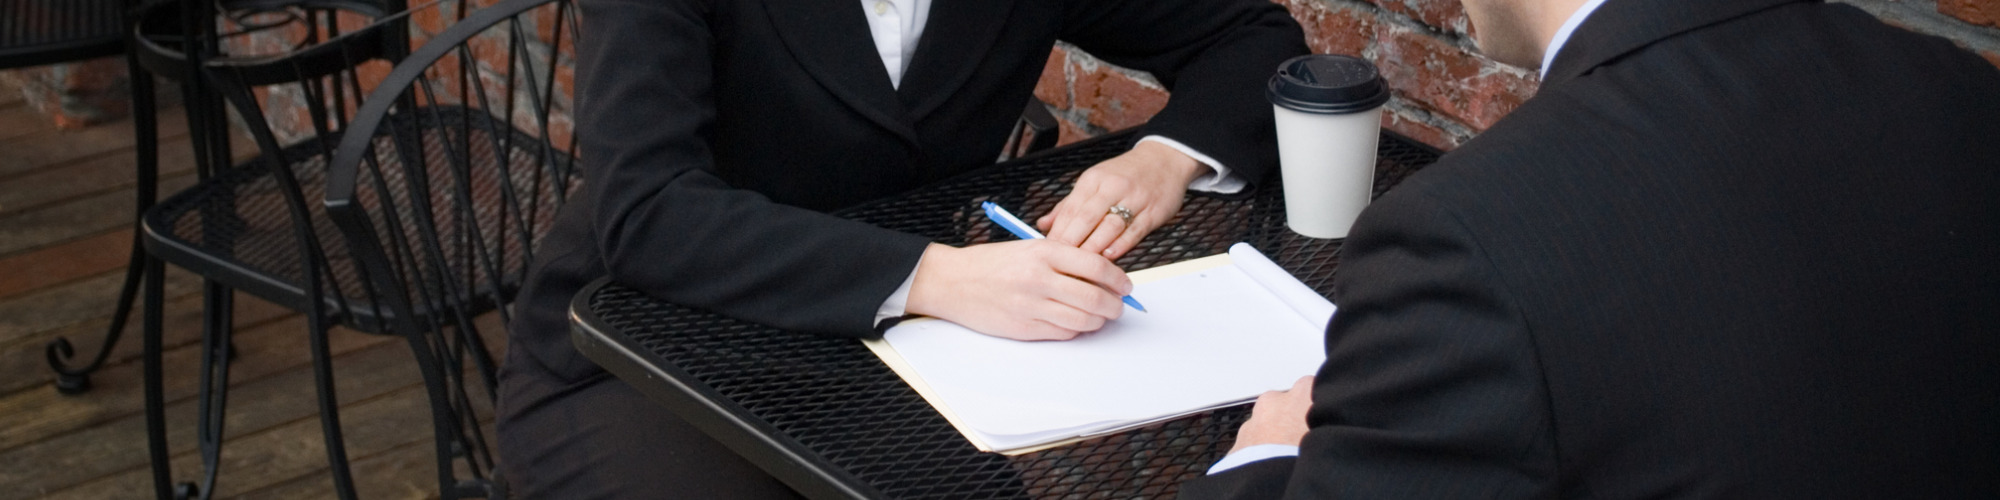 Drafting Contract Terms & Statements of Particulars - A Guide for HR Professionals